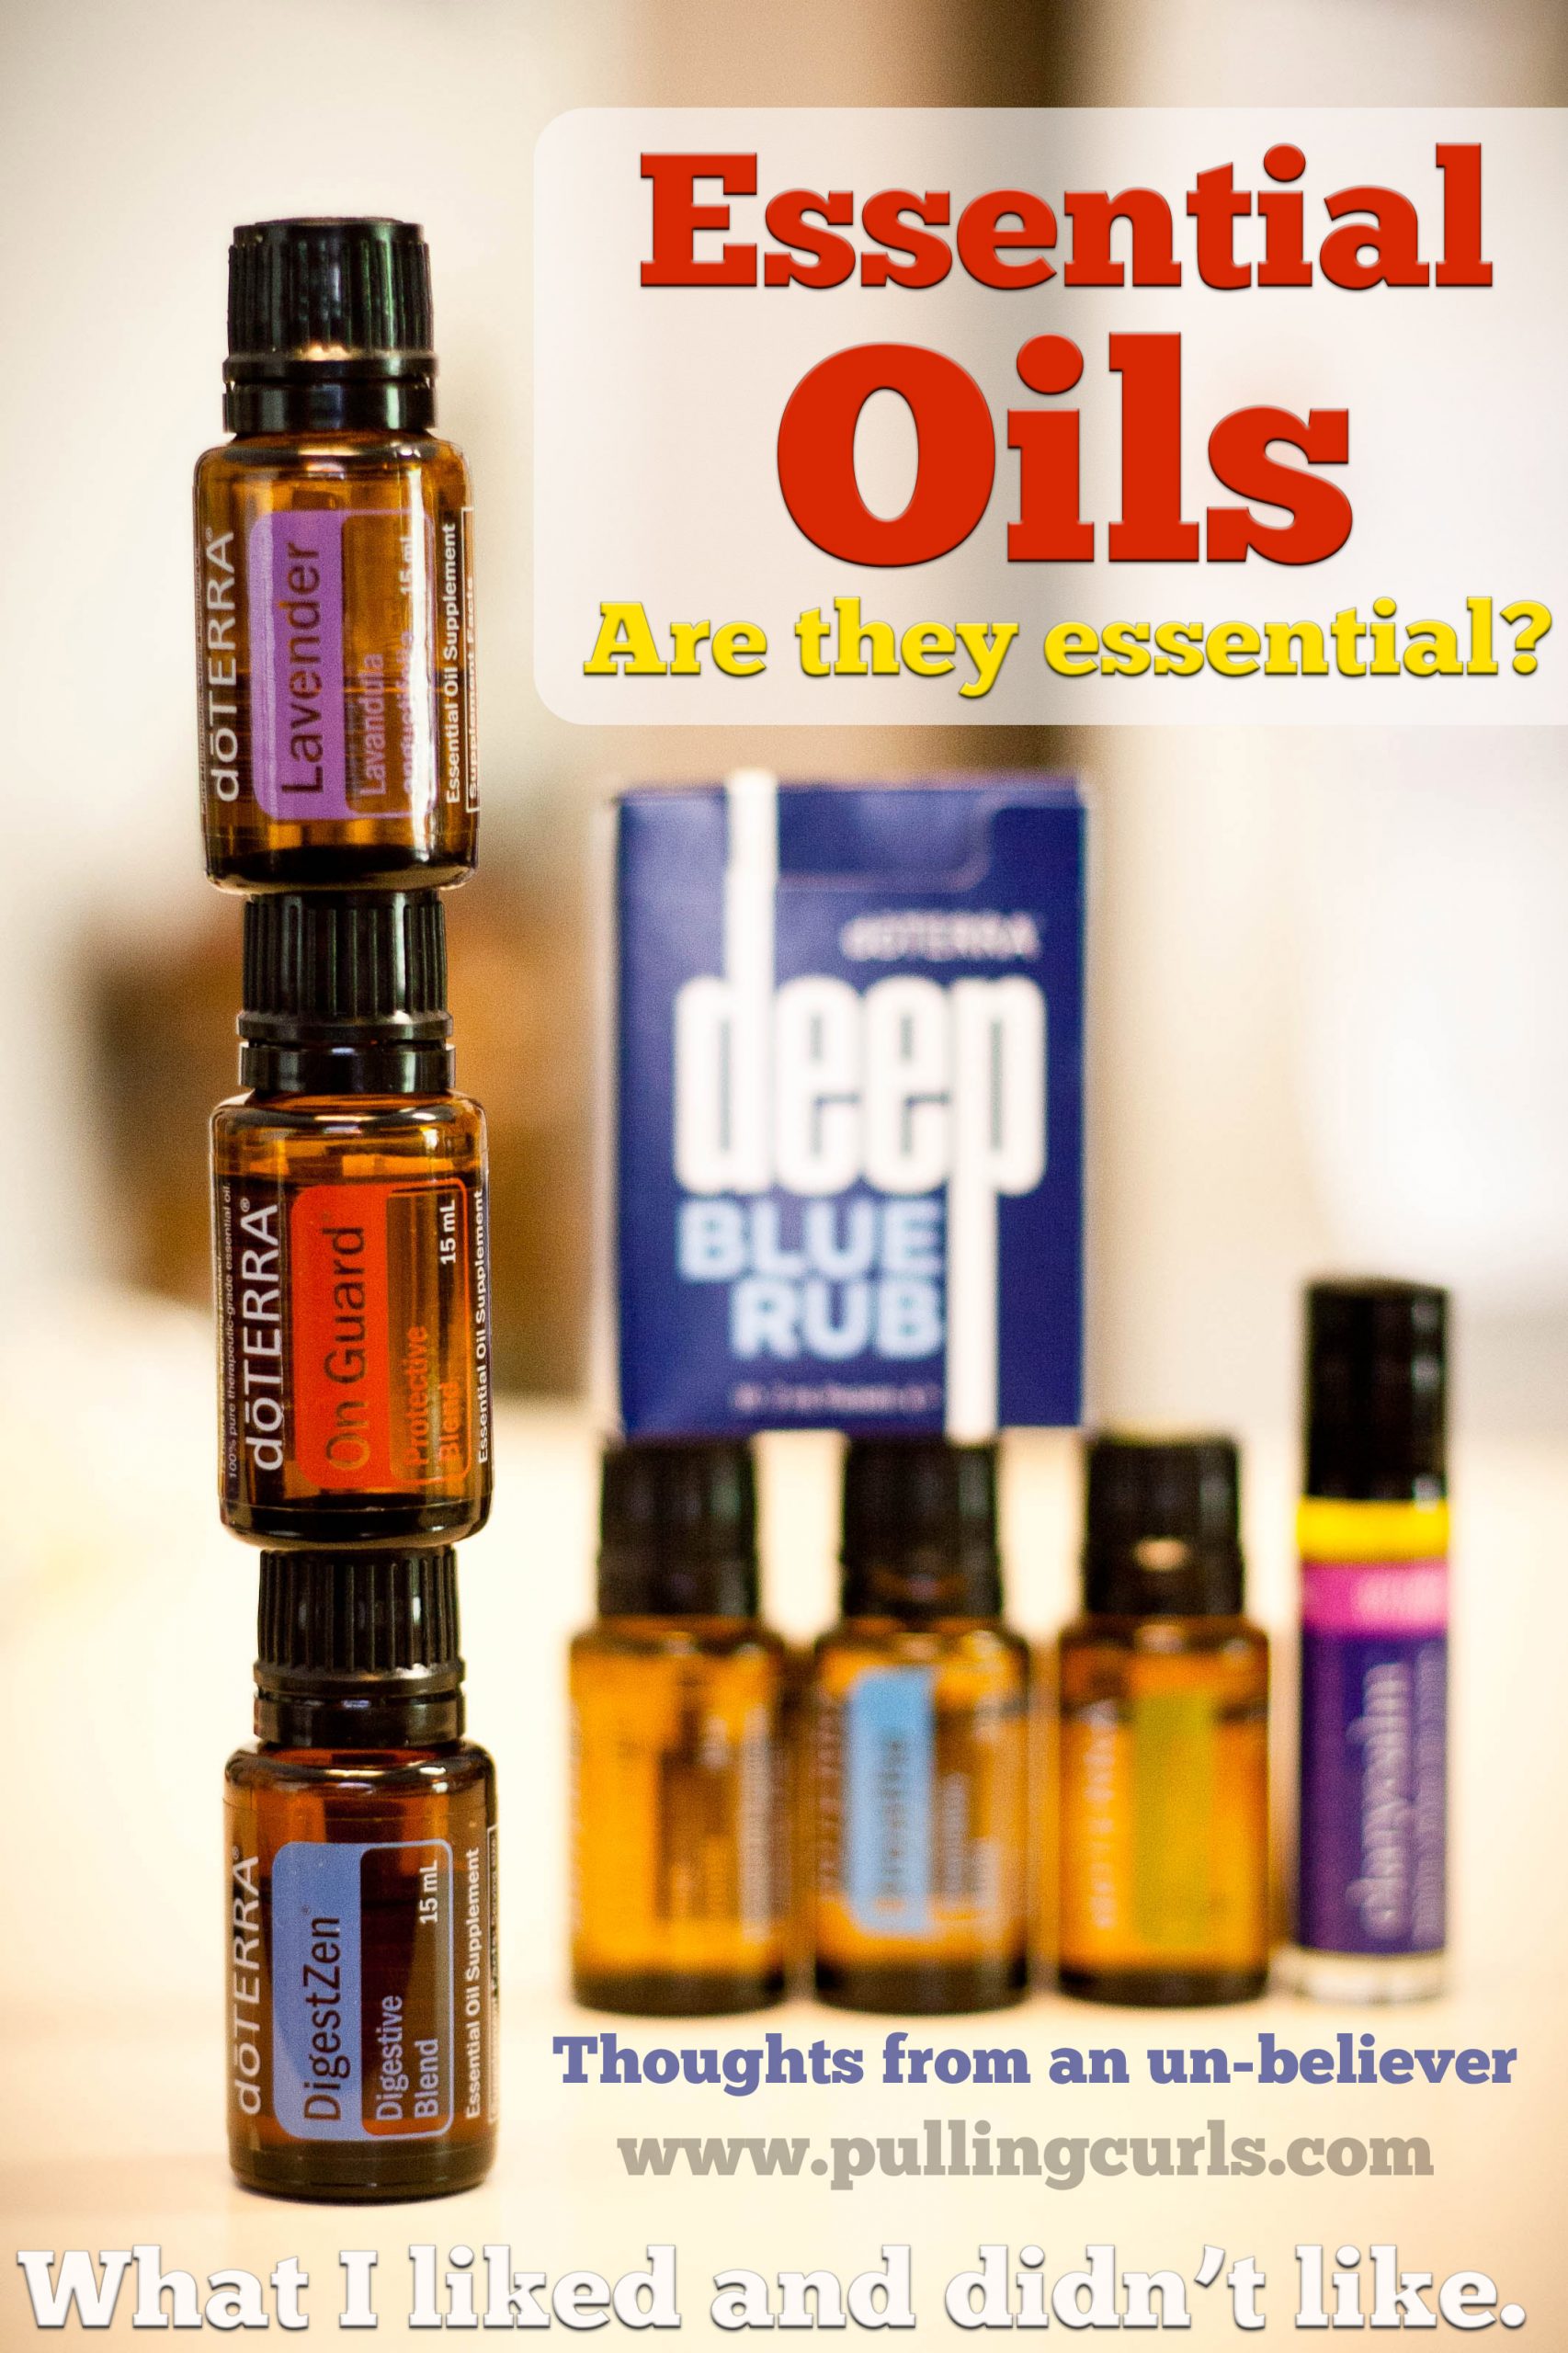 Oregano Essential Oil, 15 ml: Potent; fresh scent! - Welcome to Life! Essential  Oils